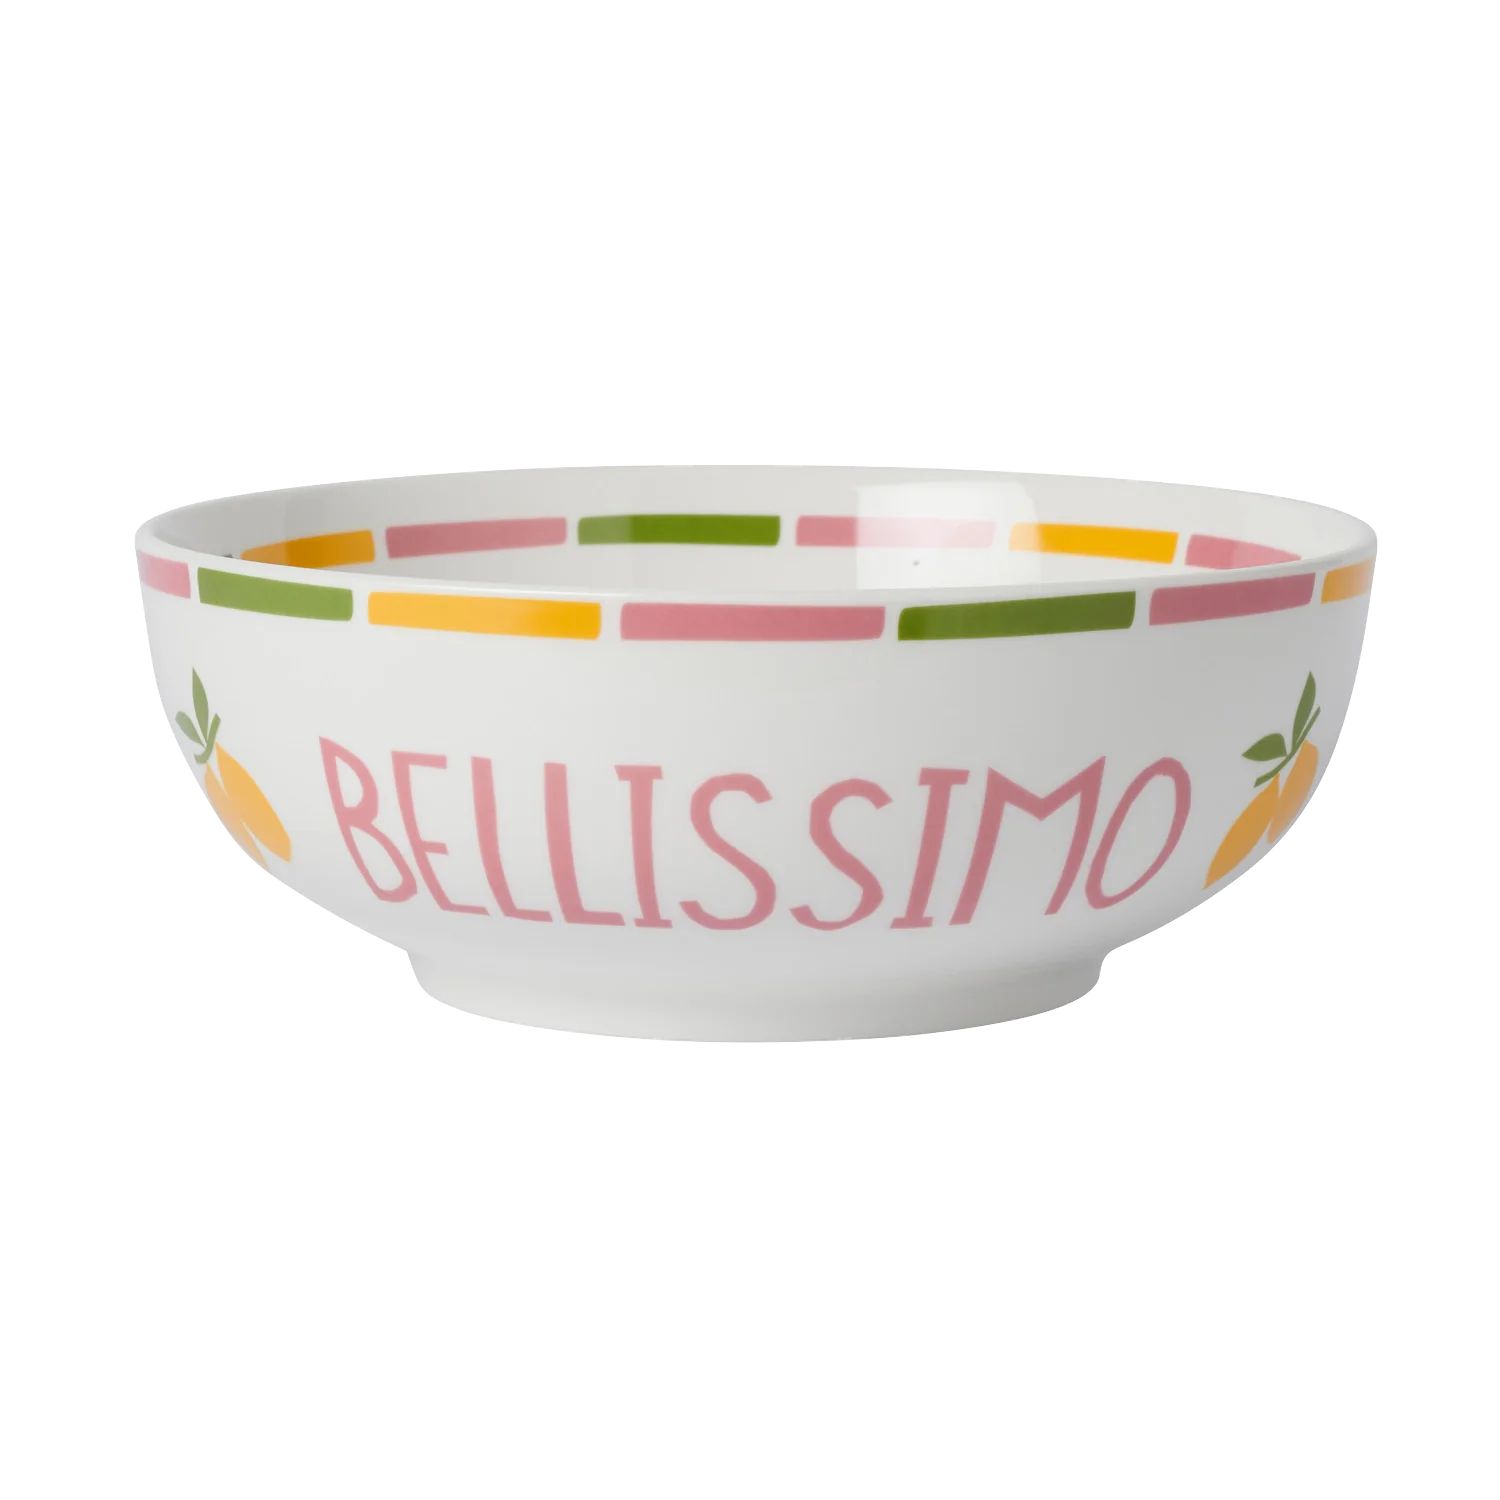 Bellissimo Serving Bowl | In the Roundhouse